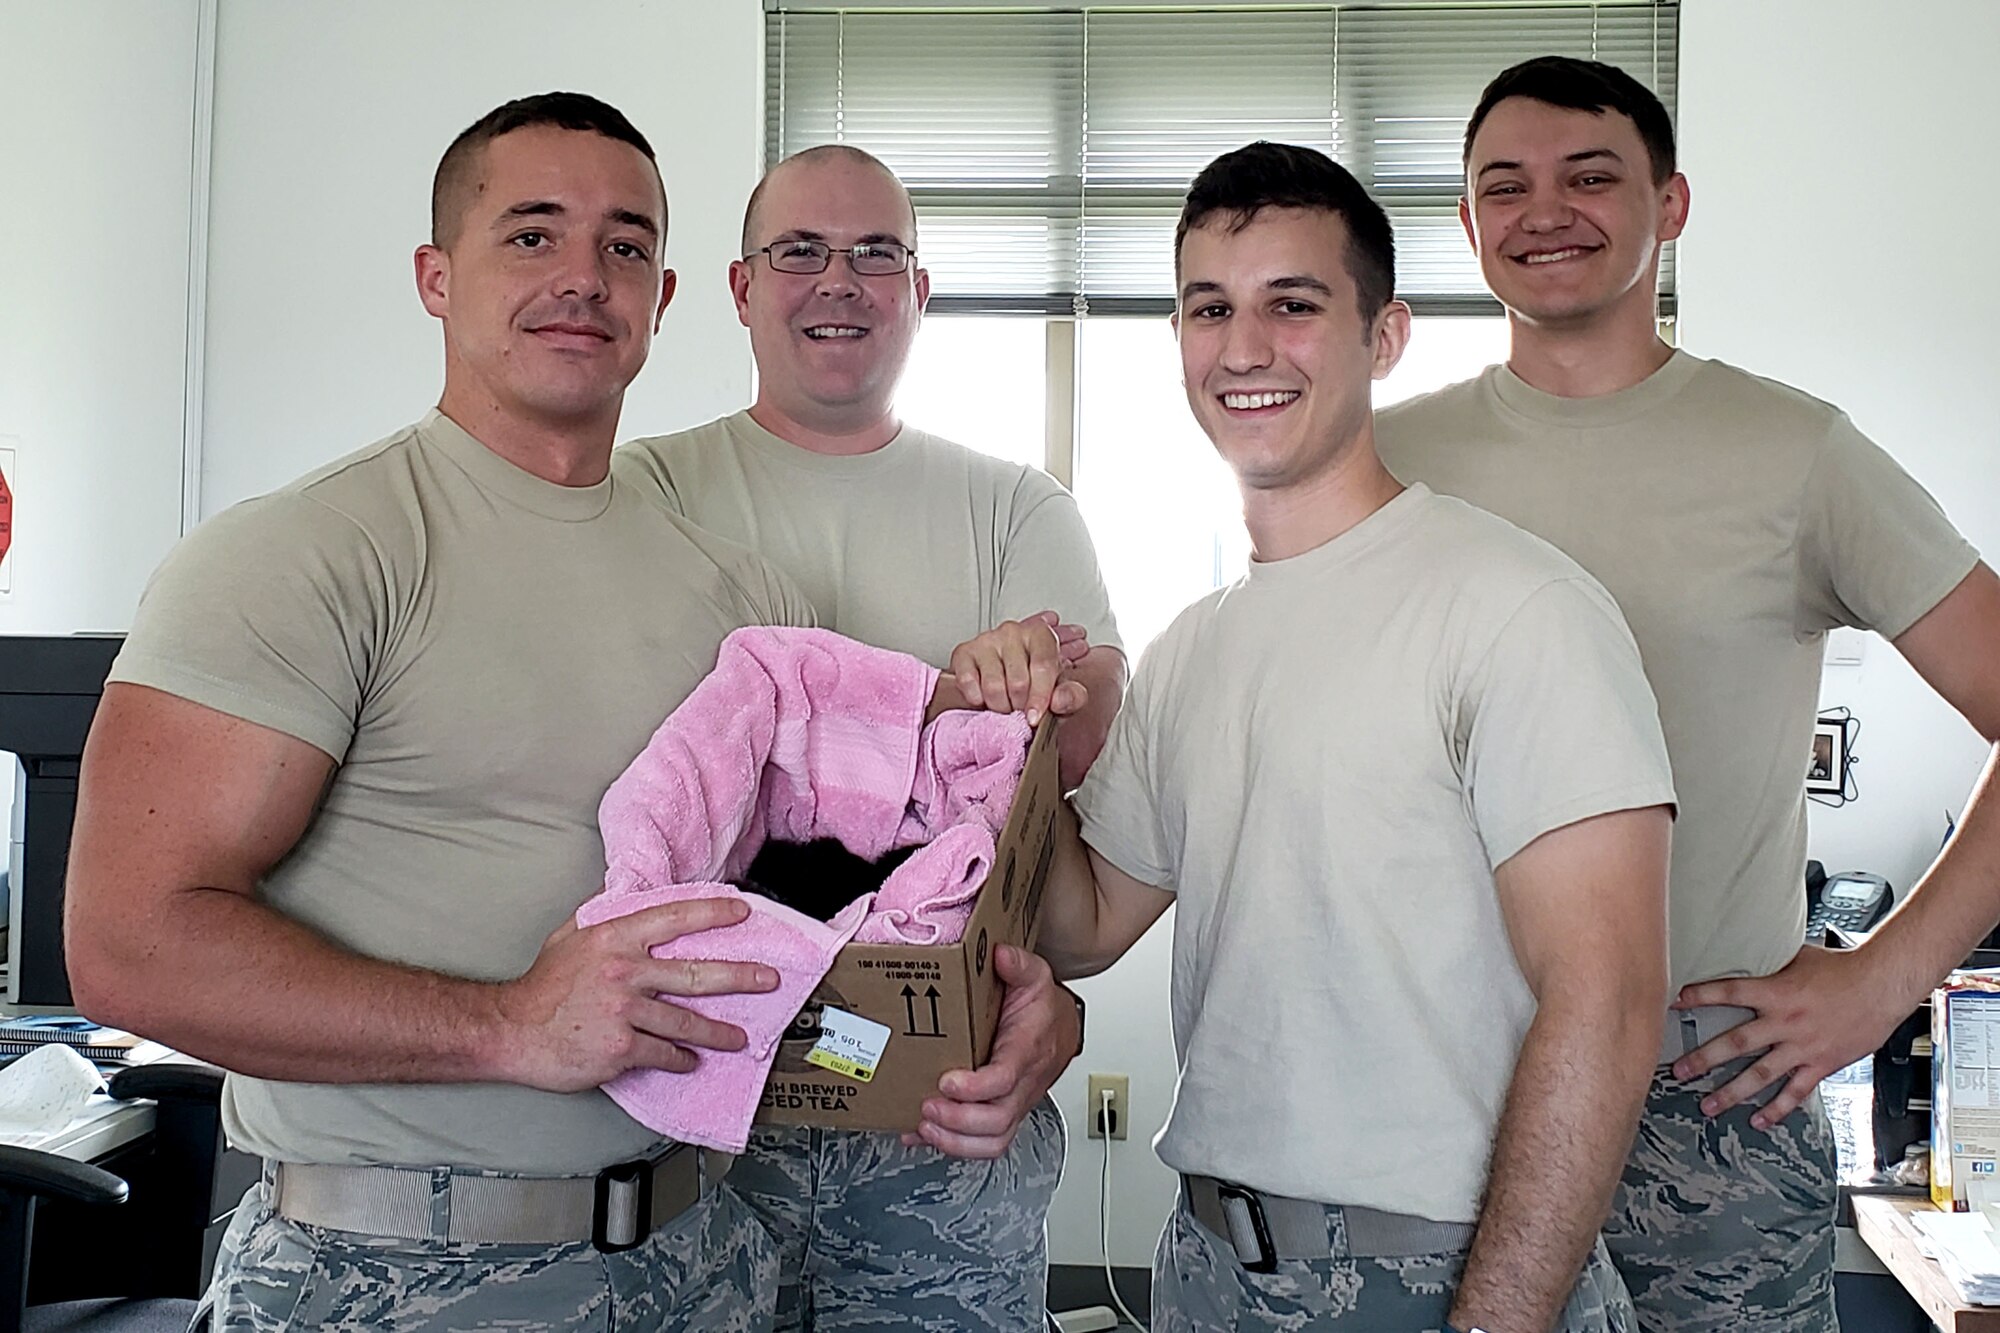 Fuels specialists for the 167th Airlift Wing, Airman 1st Class Zachary Langhorne, Master Sgt. Christopher Whiteside, Staff Sgt. Phillip Wingerd and Airman 1st Class Andrew Stover display a box holding four kittens that were found in a hose reel of a fueling truck while the truck was refueling a C-17 Globemaster aircraft at the Martinsburg, W.Va. air base, June 19, 2018. The kittens eventually found homes with 167th AW Airmen.